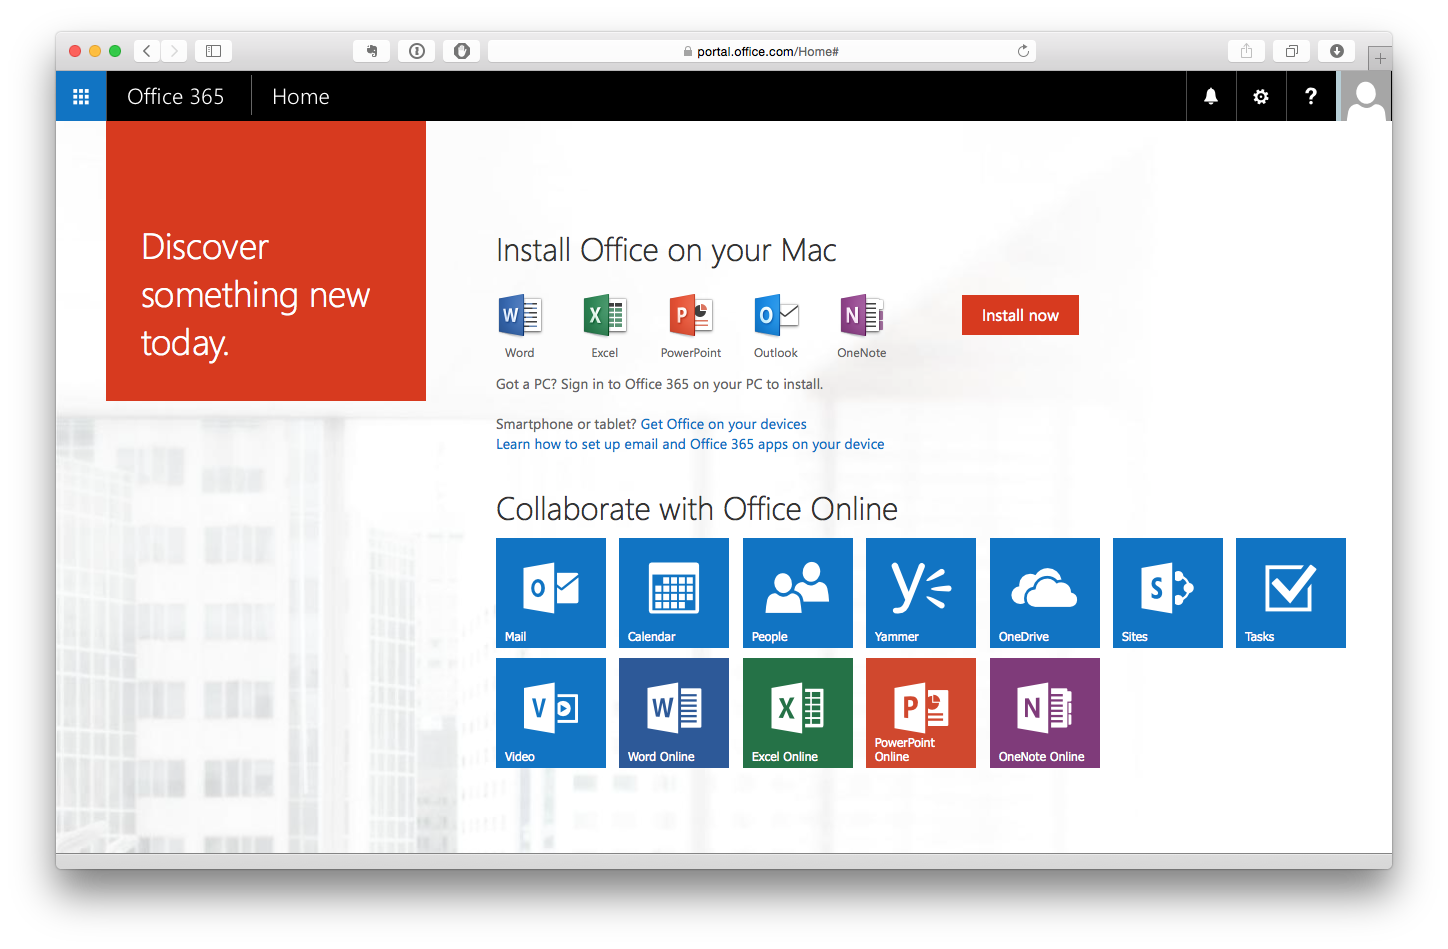 use office for mac 2016